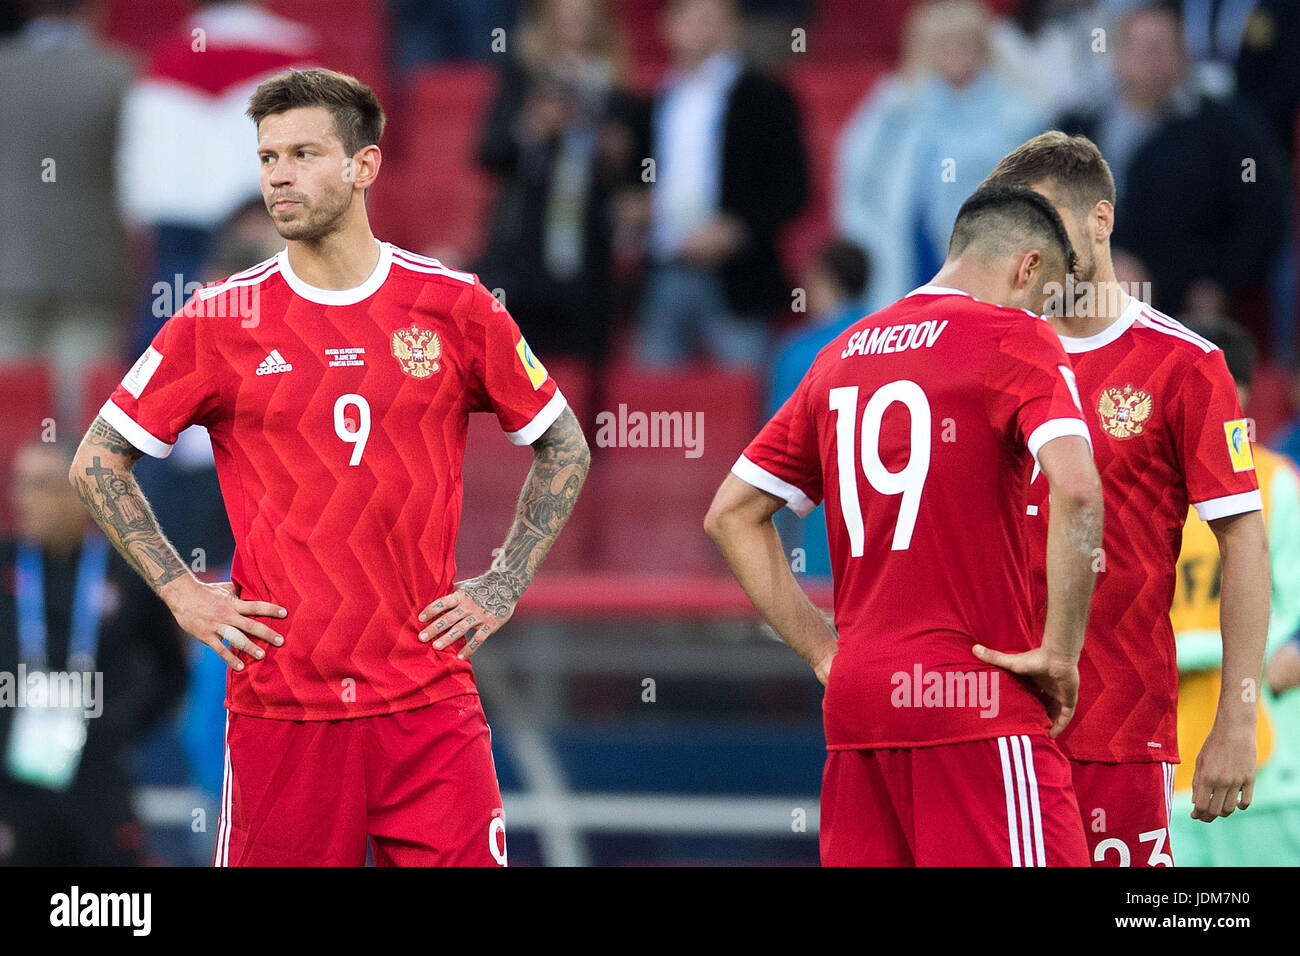 Moscow, Russia. 21st June, 2017. Russia's Fedor Smolov (left to right), Alexander Samedov and Dmitry Kombarov standing on the pitch after the preliminary stage group A match between Russia and Portugal in the Spartak Stadium in Moscow, Russia, 21 June 2017. Photo: Marius Becker/dpa/Alamy Live News Stock Photo